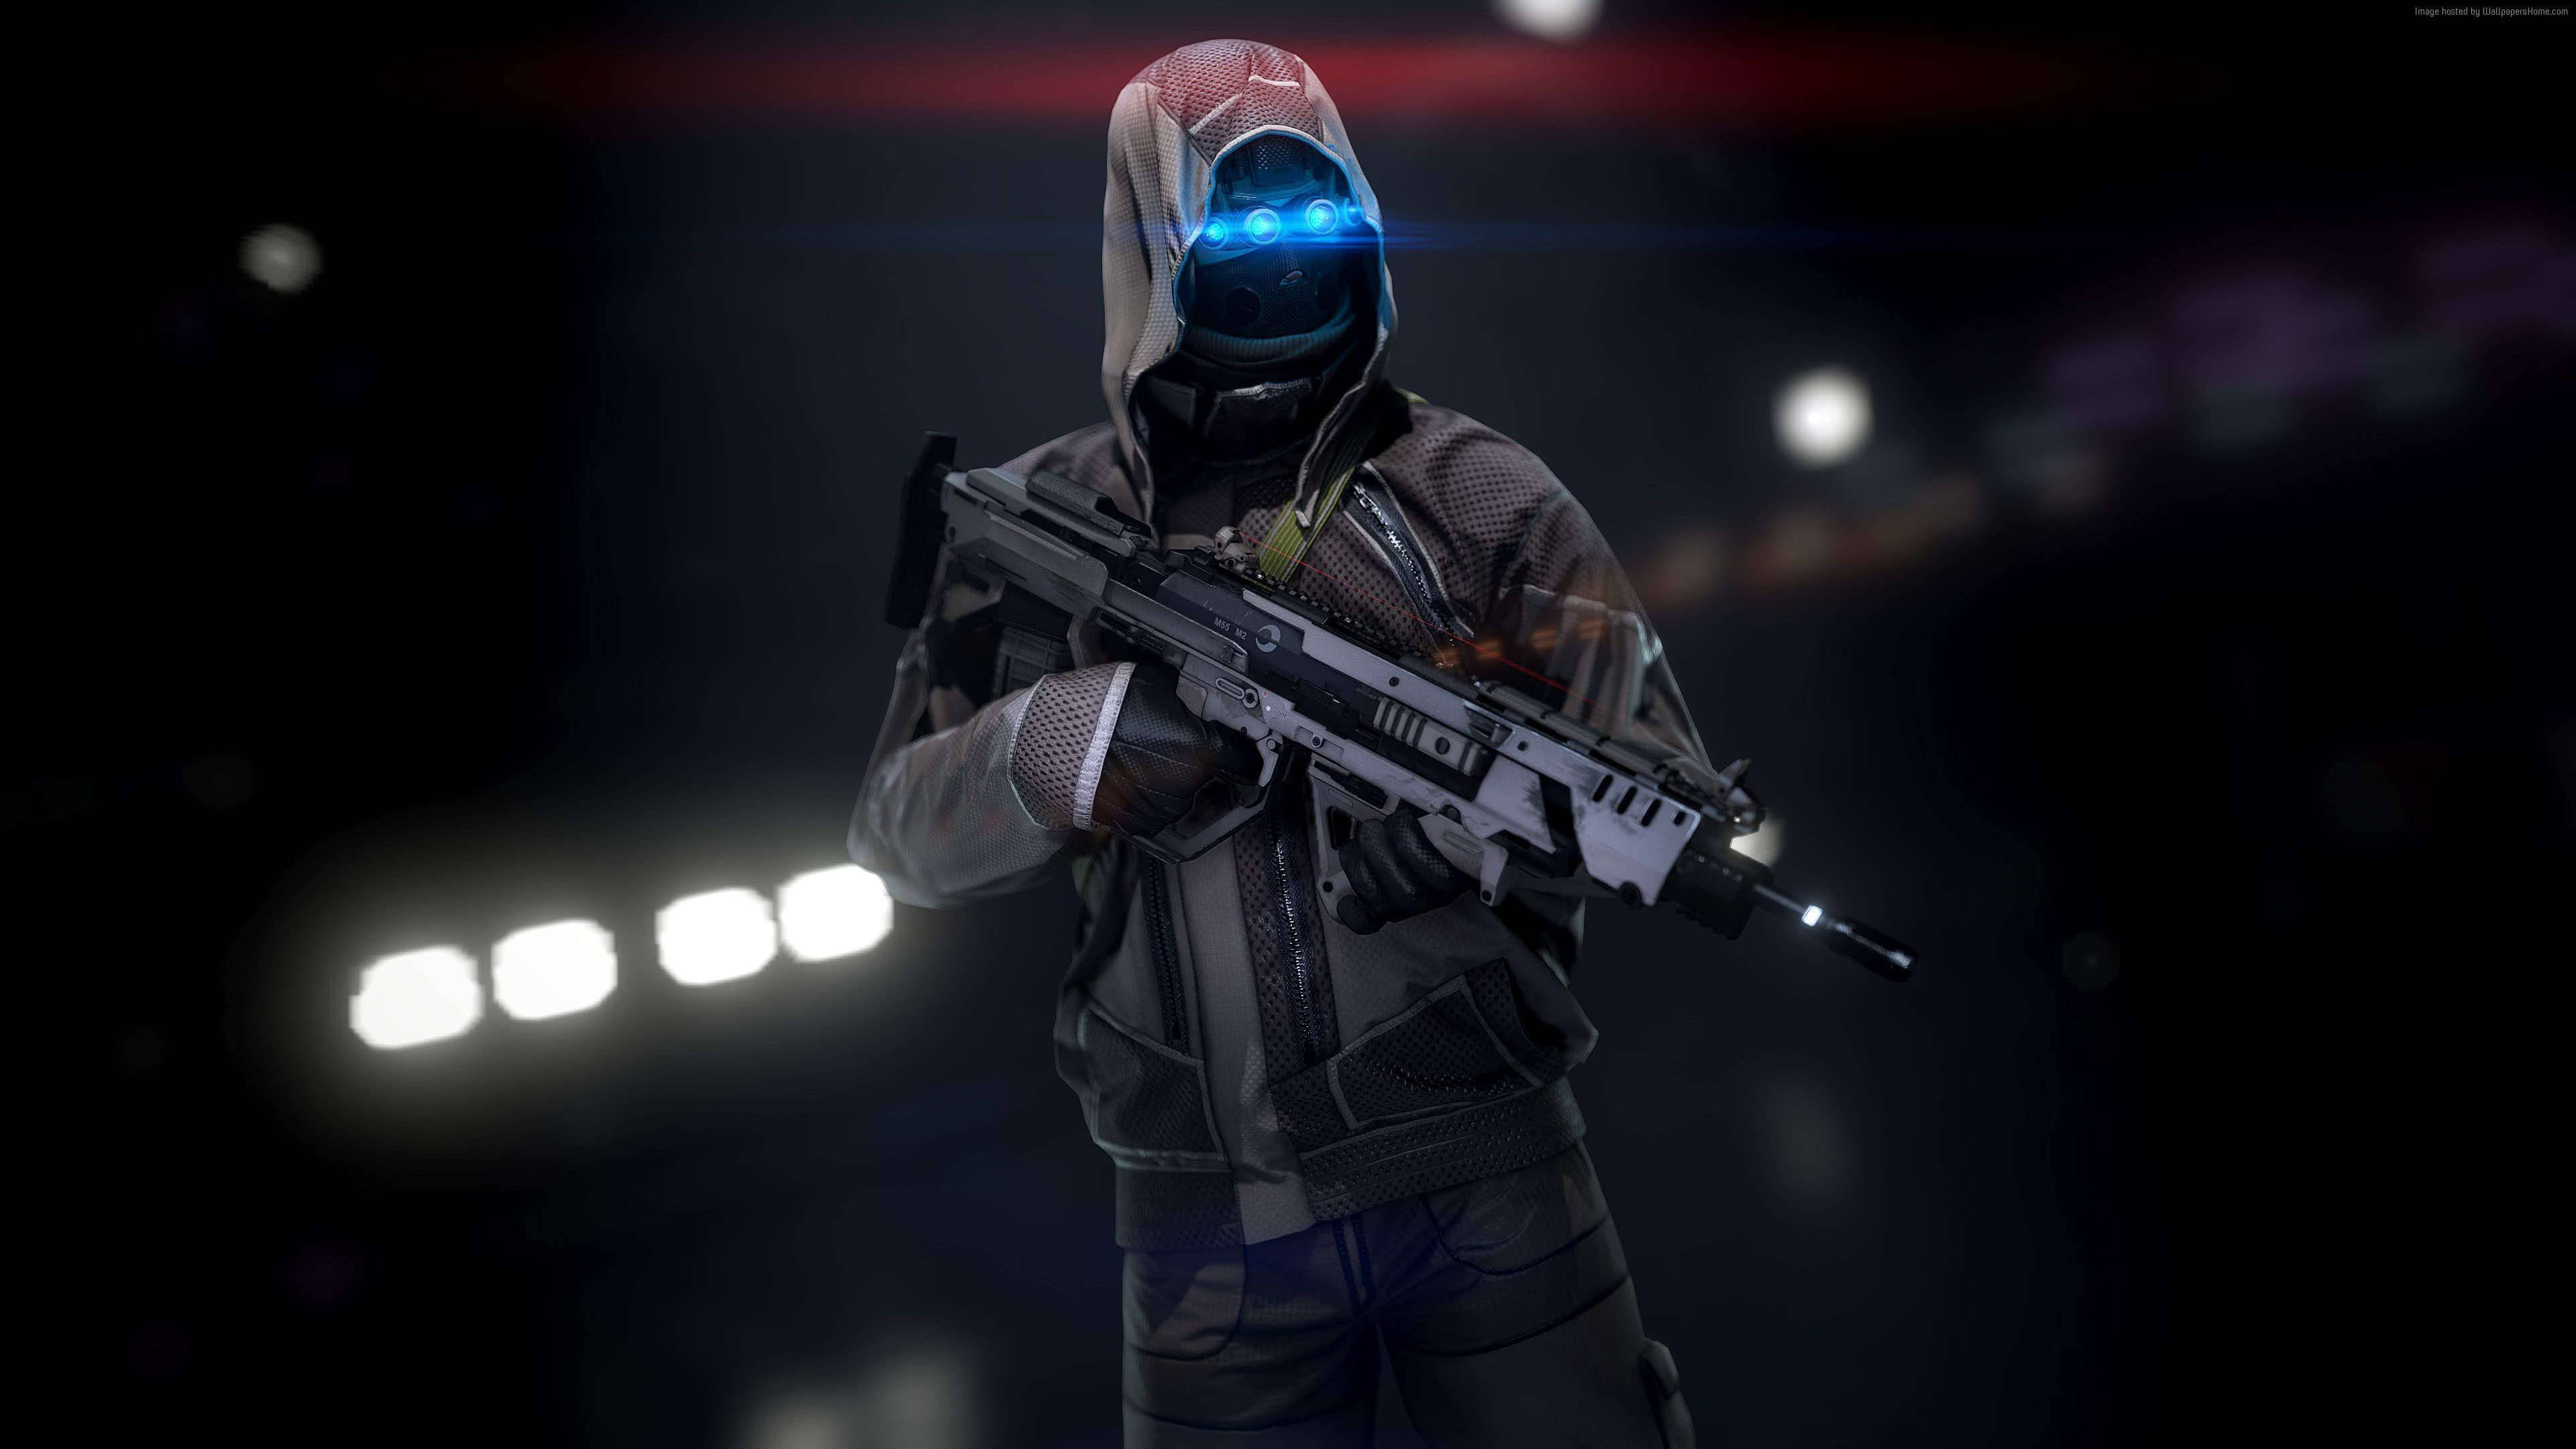 Download Pubg Hd Hooded Character With Blue Lights Wallpaper | Wallpapers .com